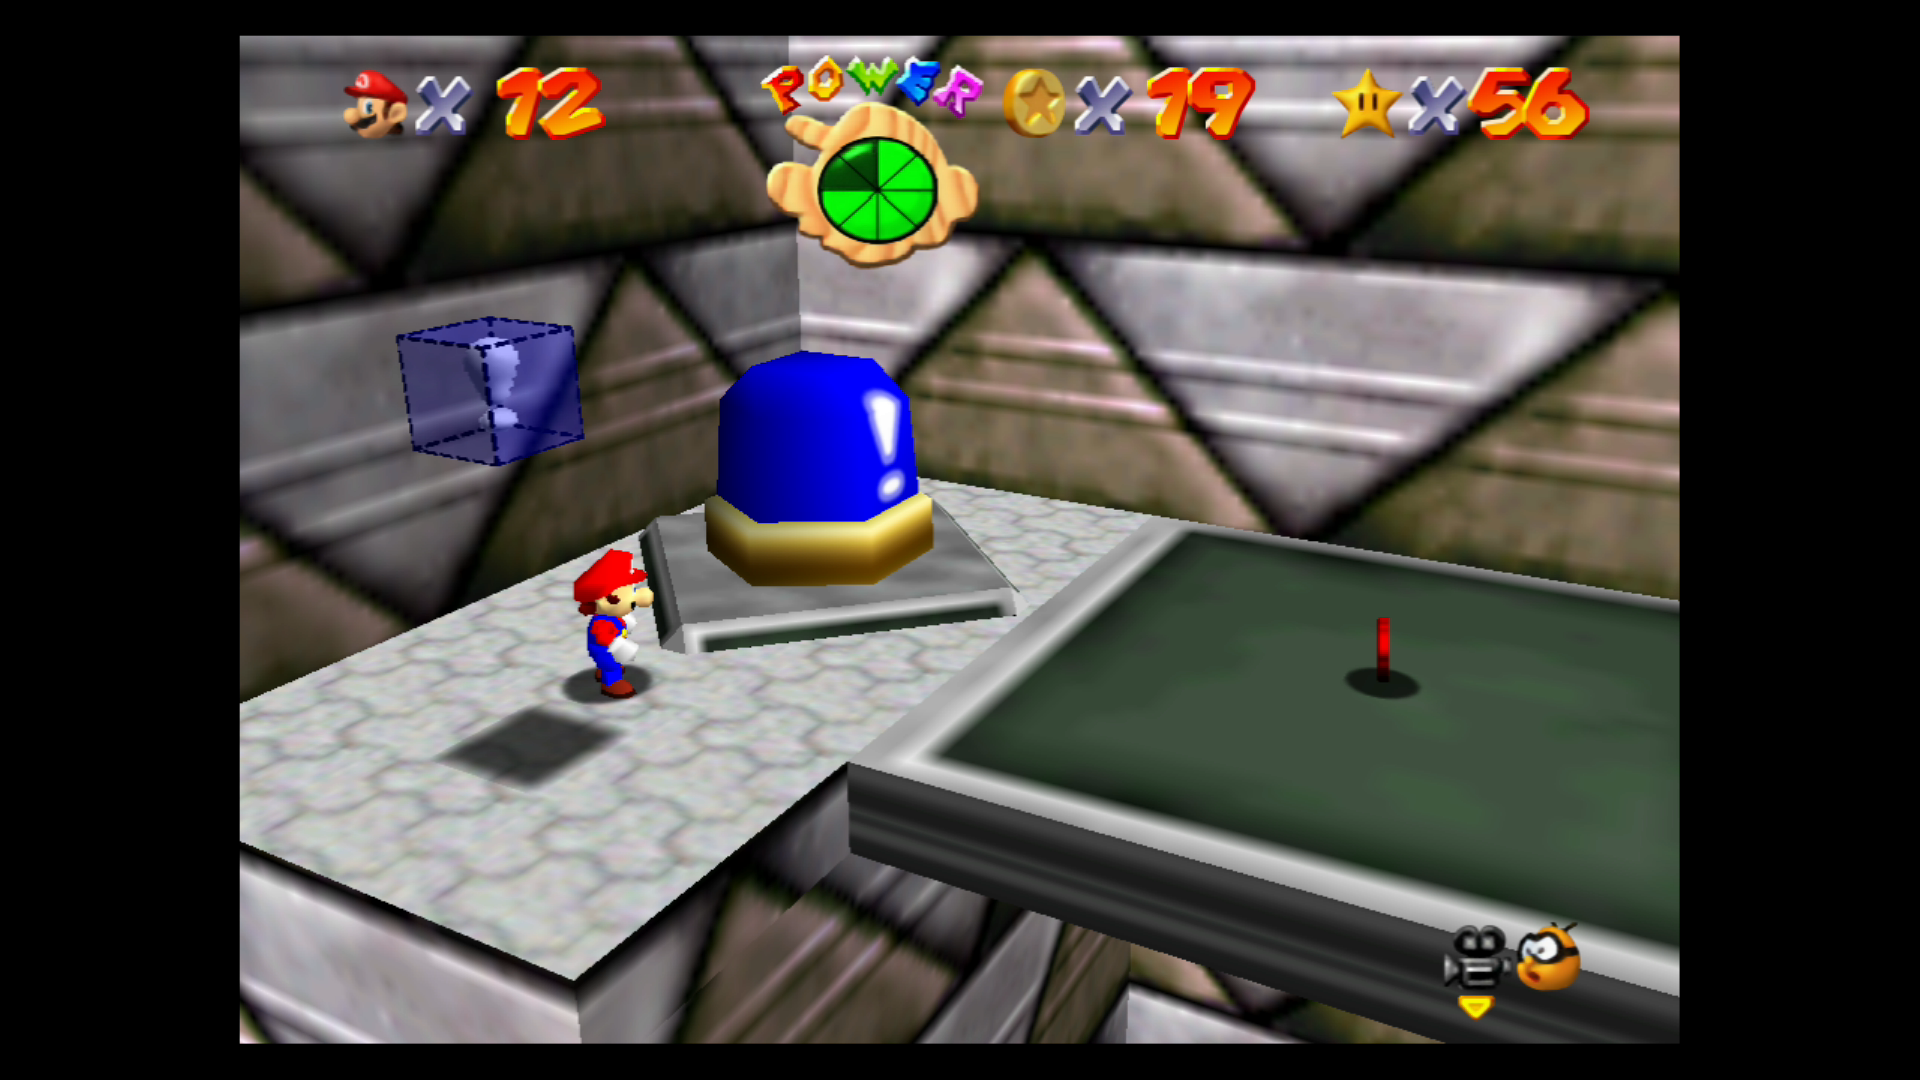 Image for Super Mario 64: Castle Secret Stars, Cap unlocks for the Red Blue and Green Boxes